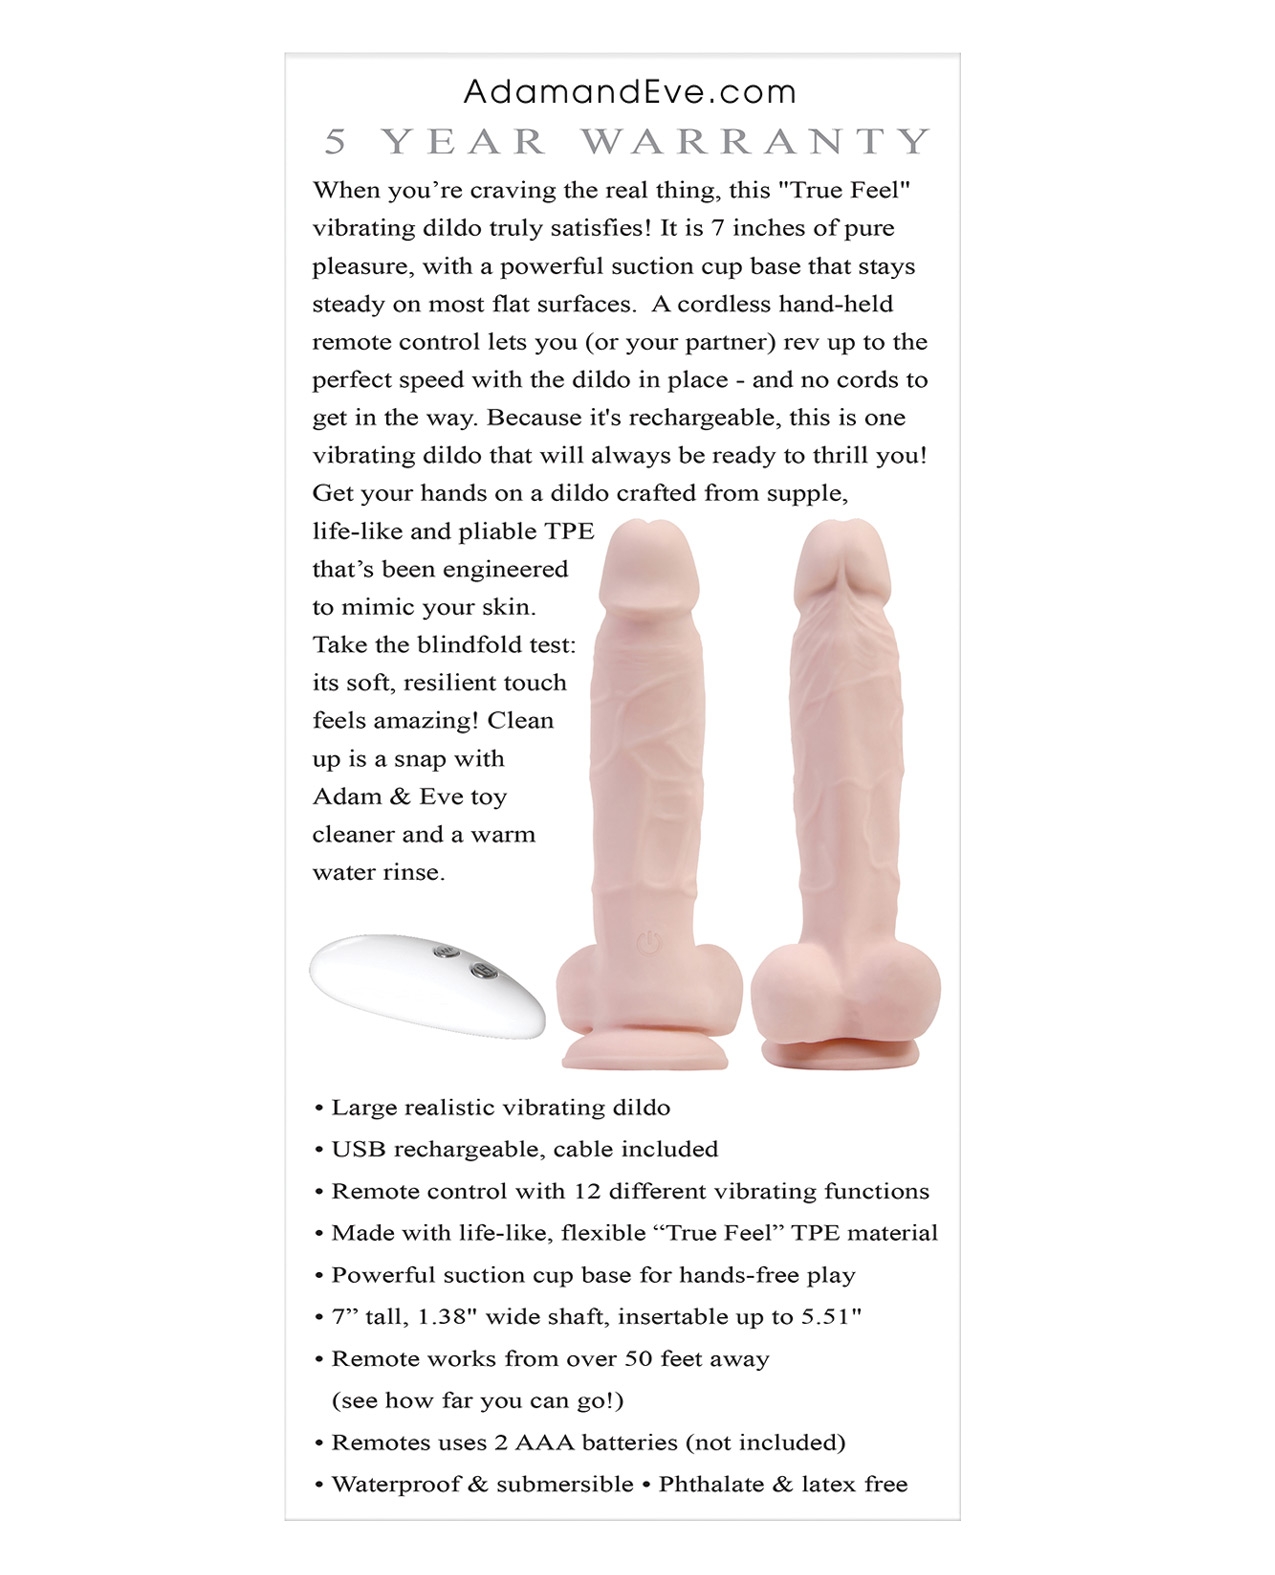 Adam and eve sexual toys